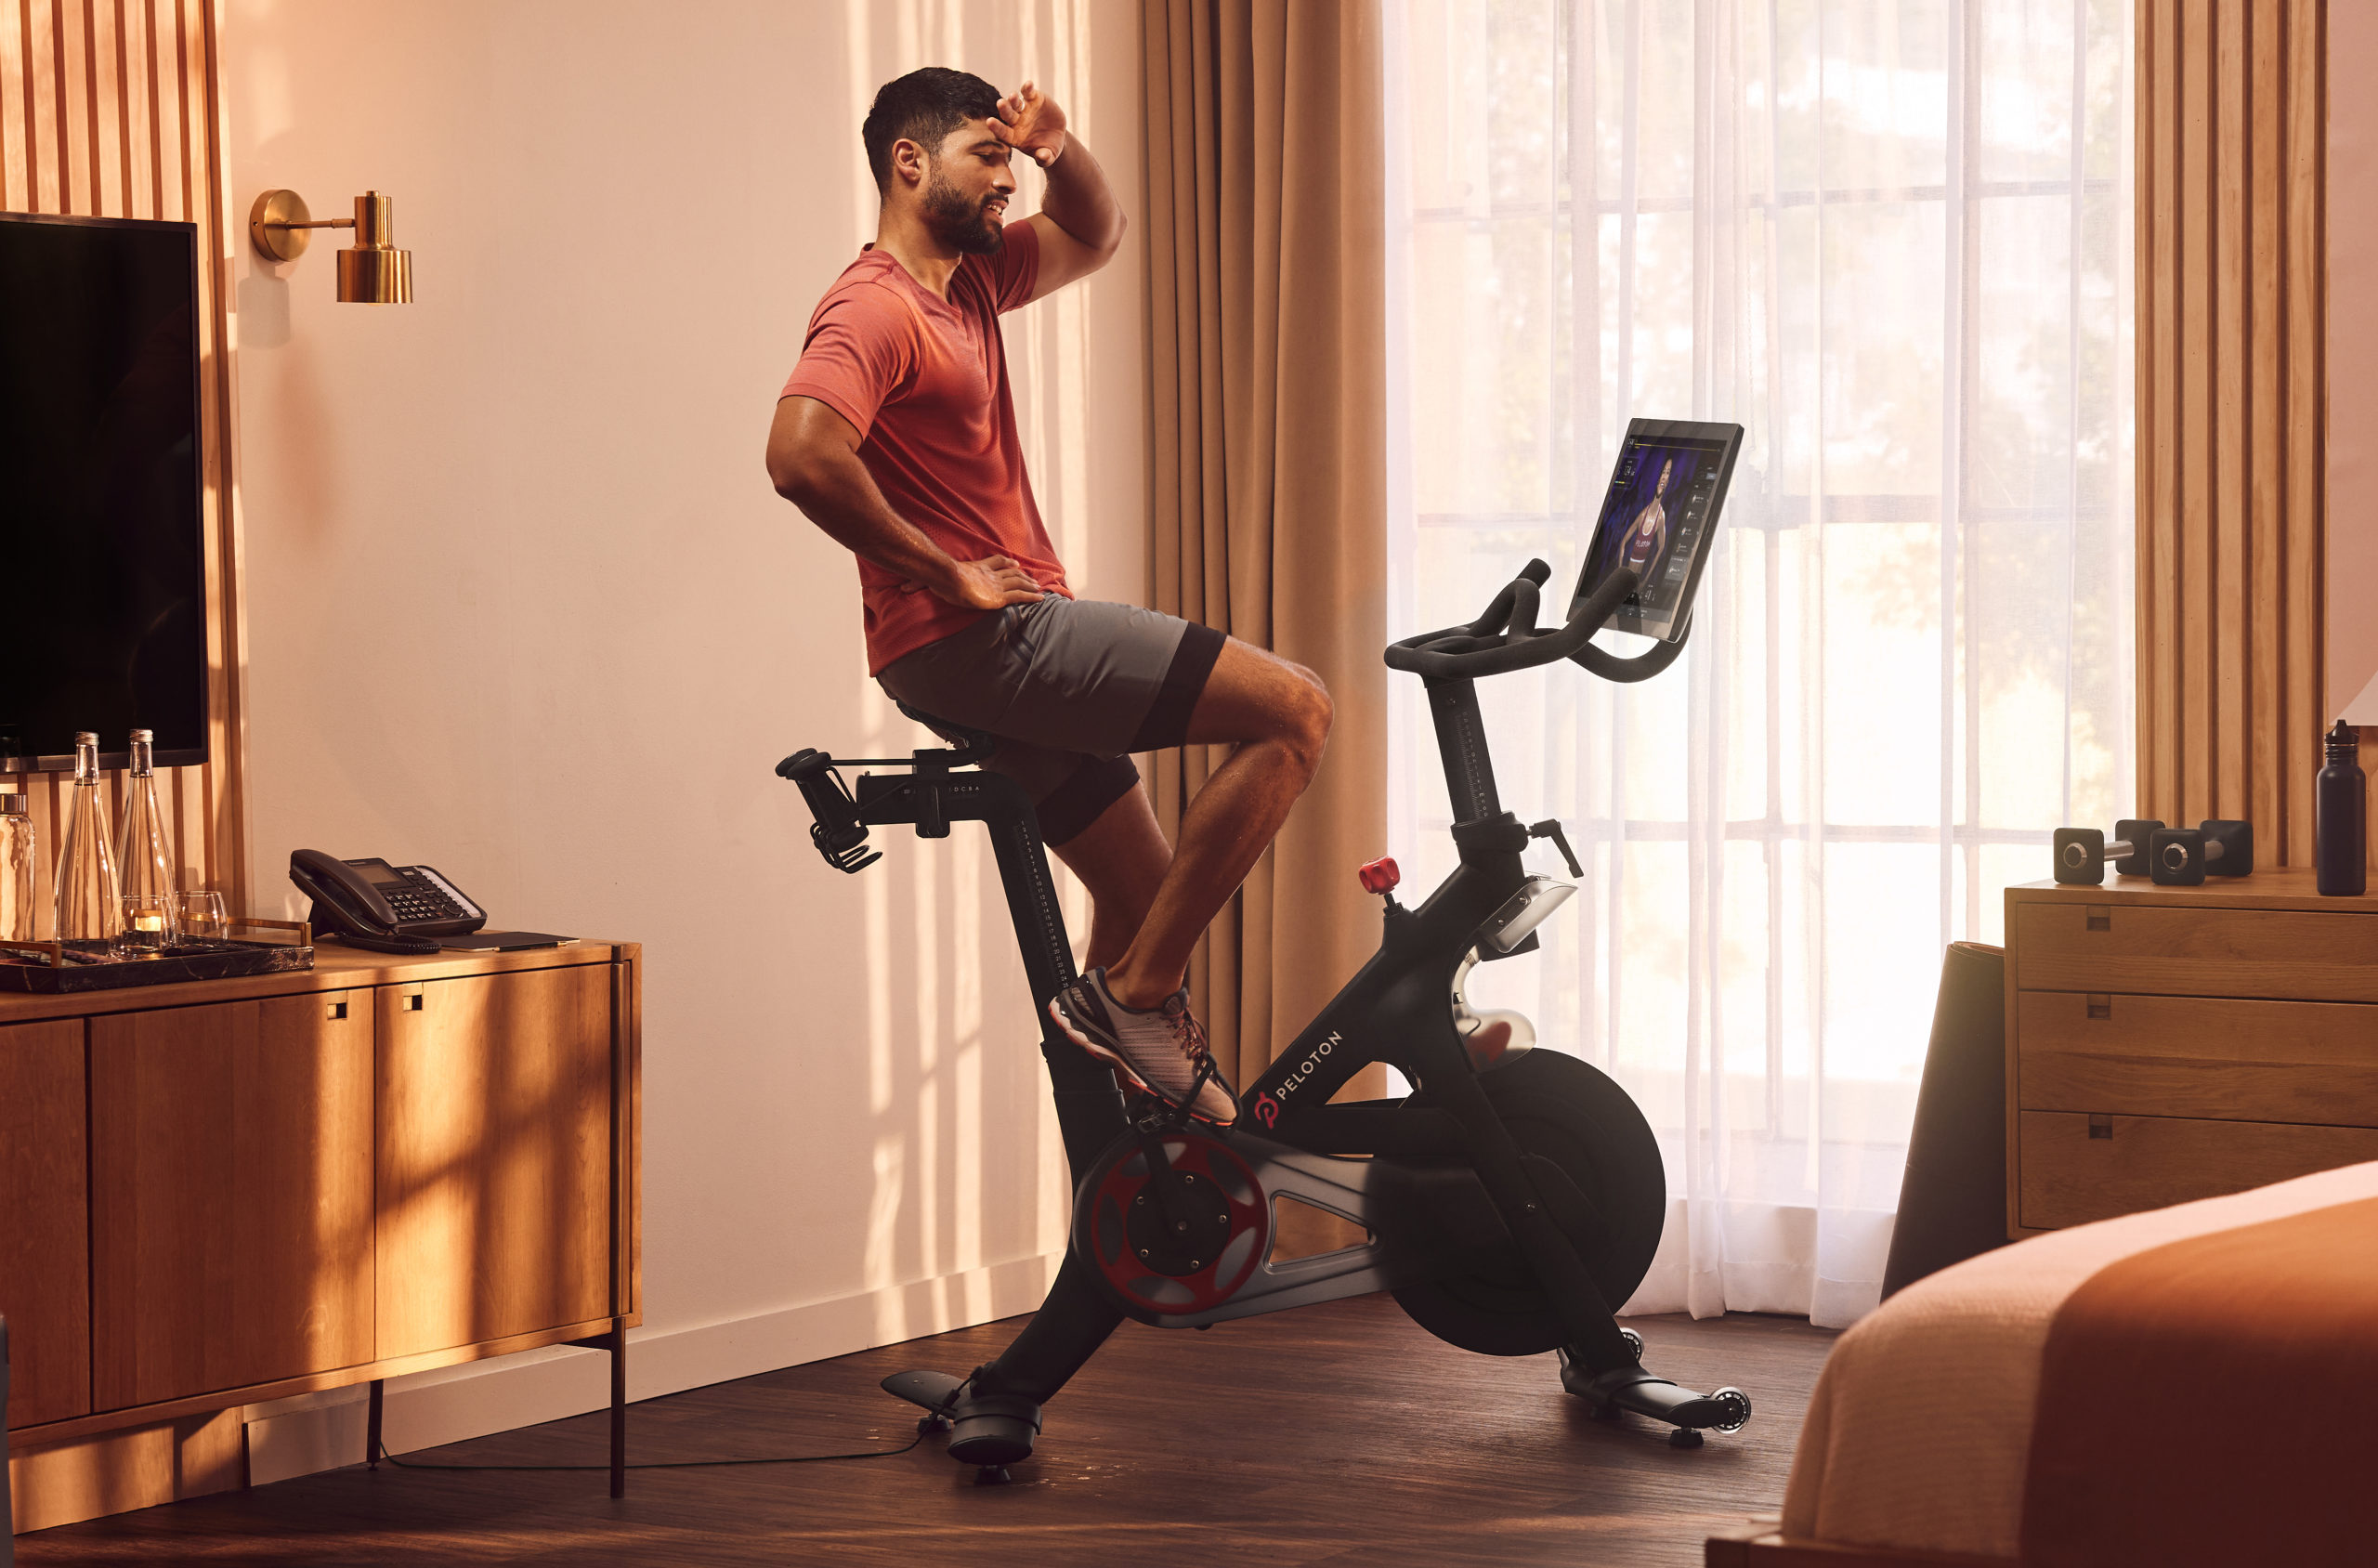 man riding a peloton bike in a bedroom or hotel